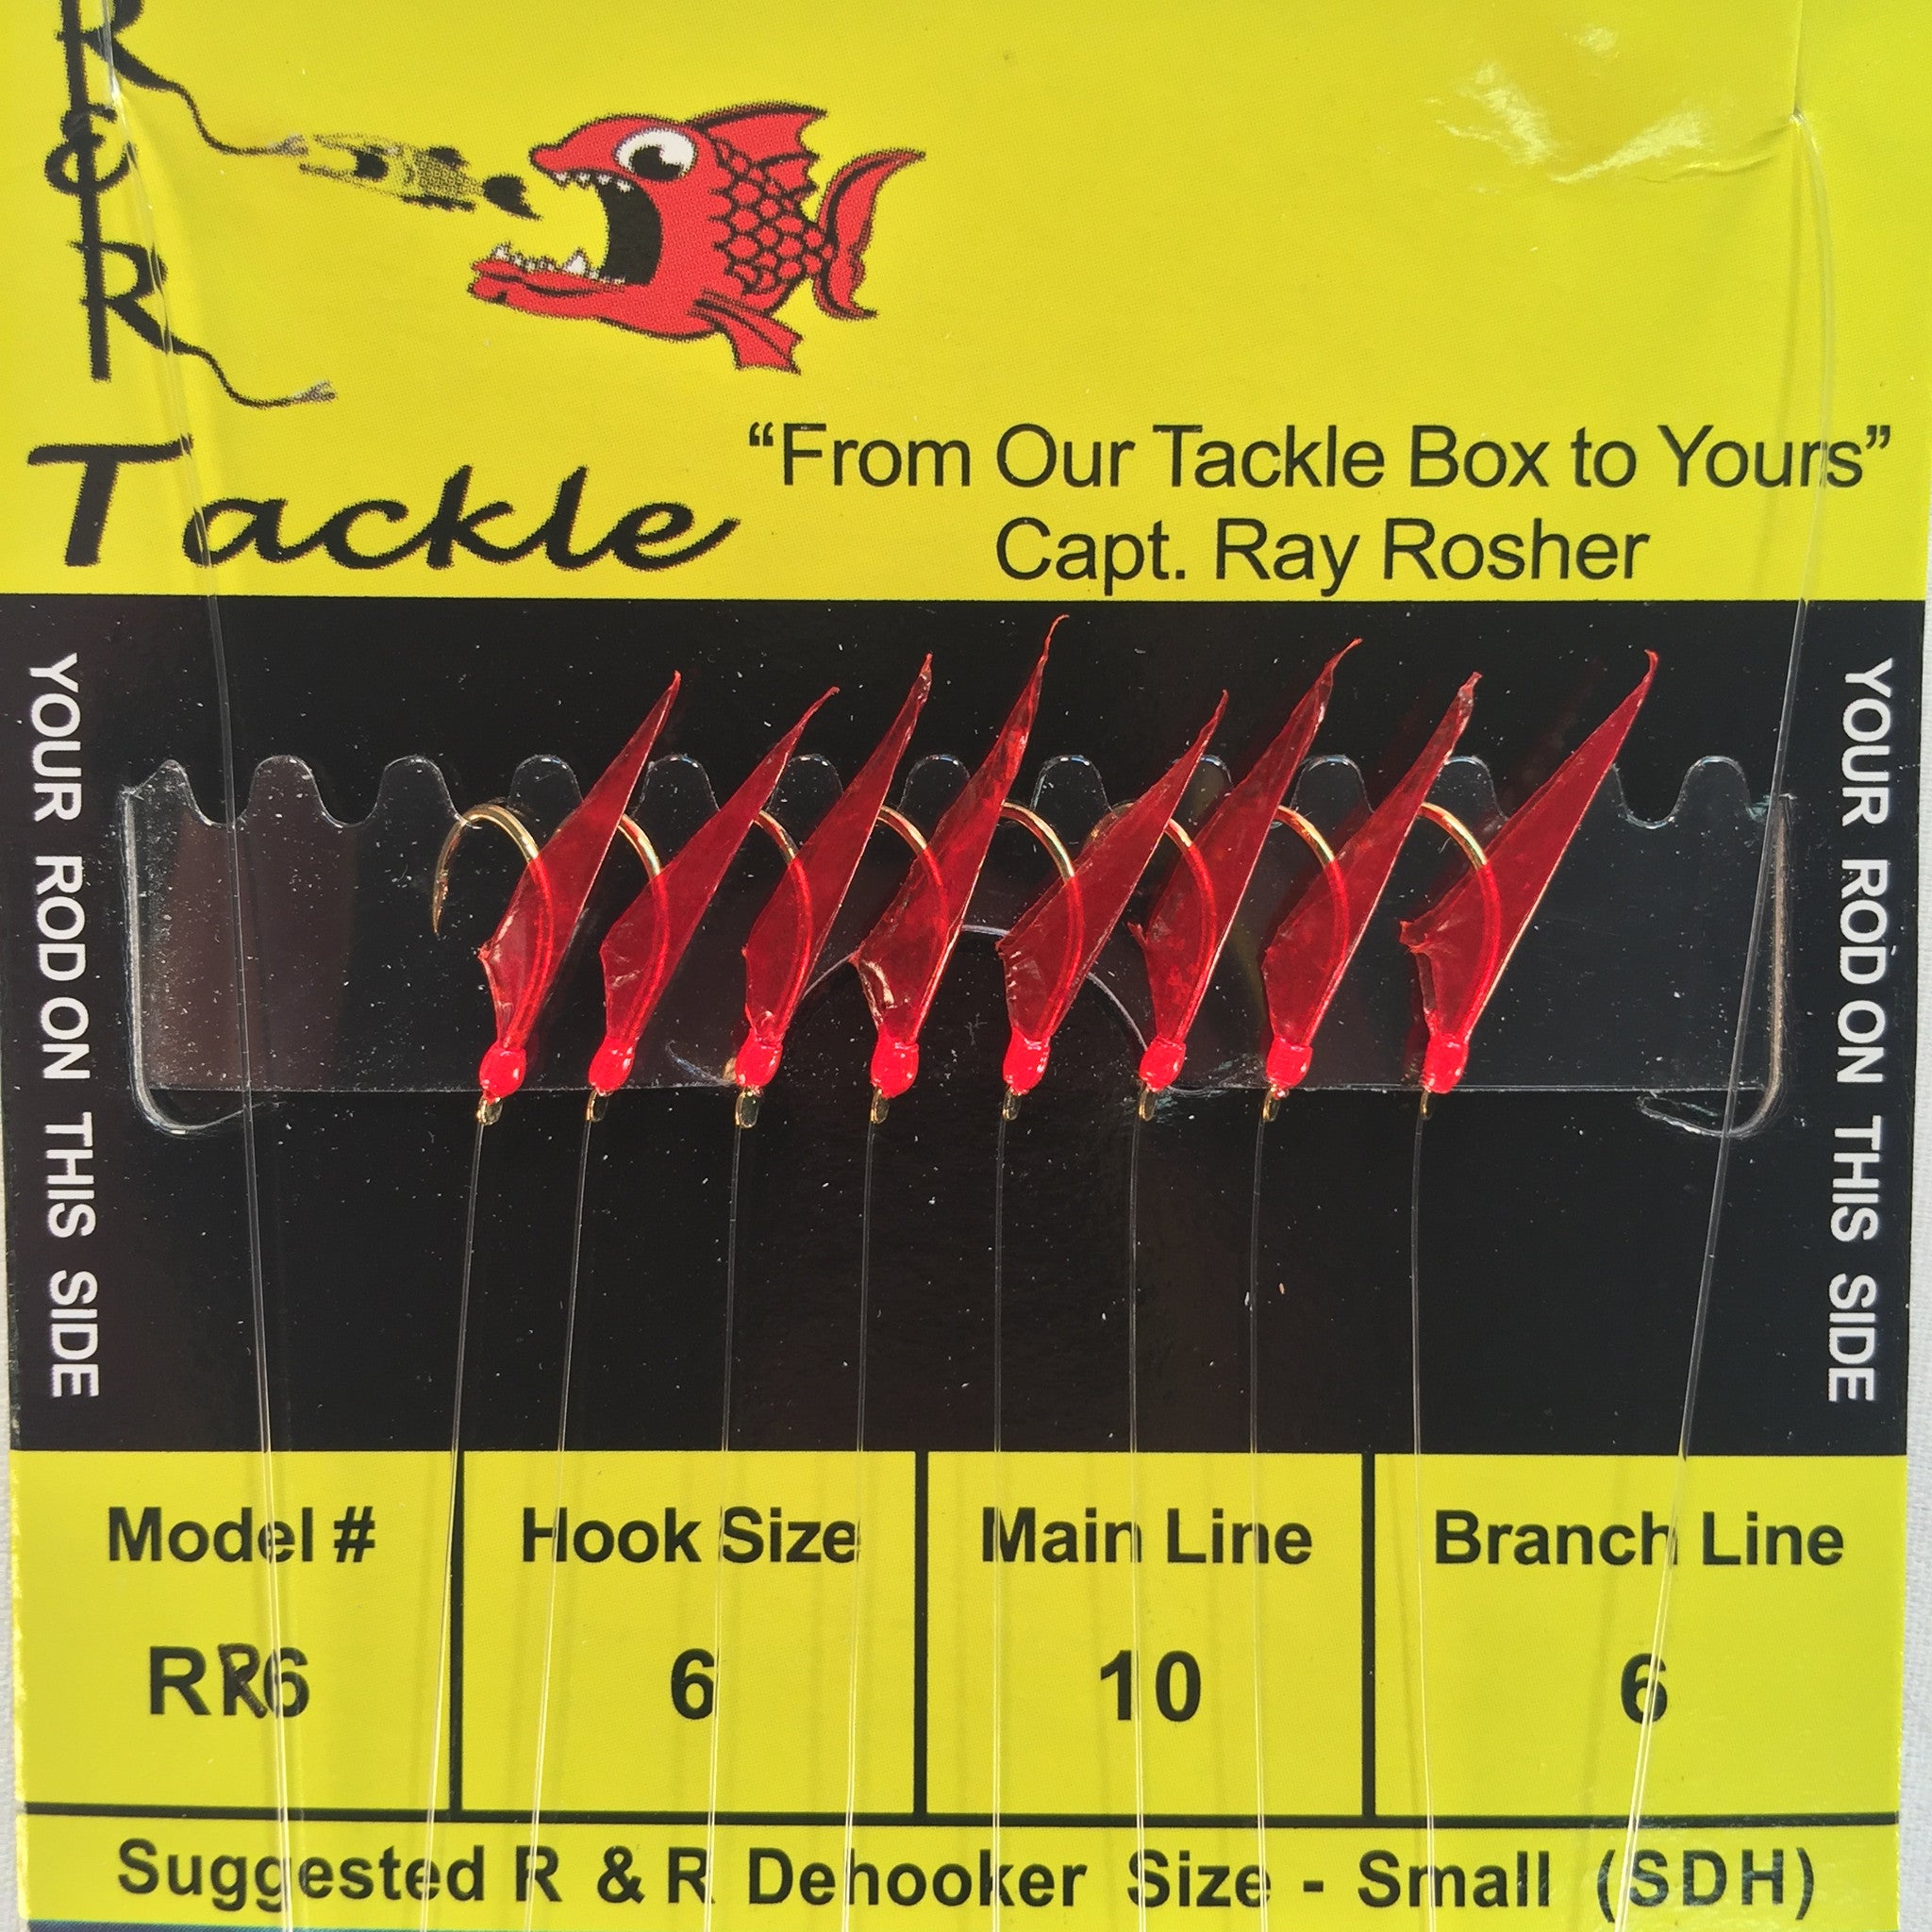 RR Mono Bait Rig - with red skin & red heads